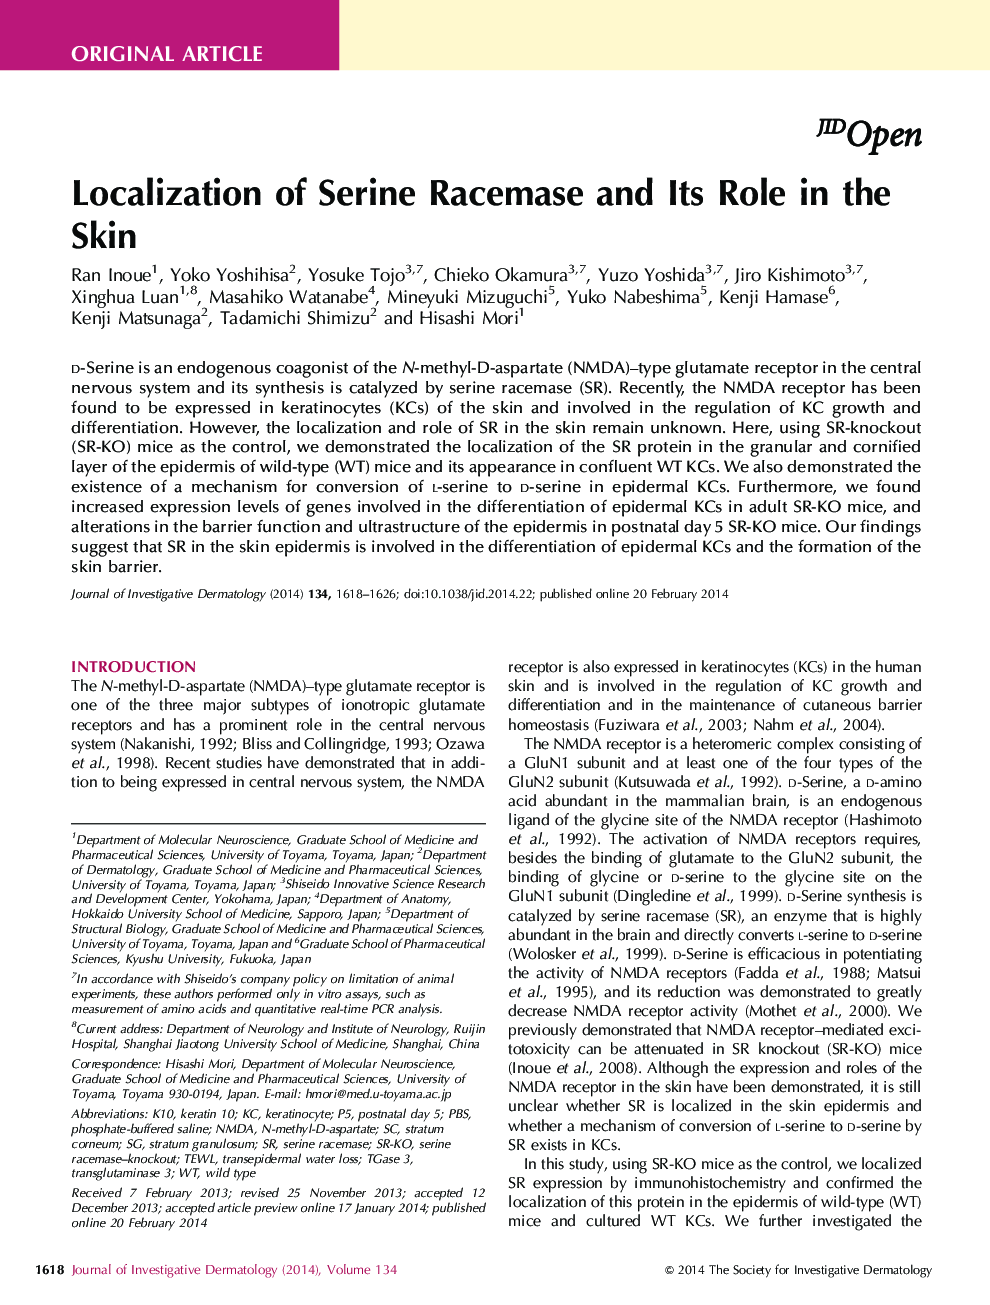 Original ArticleLocalization of Serine Racemase and Its Role in the Skin